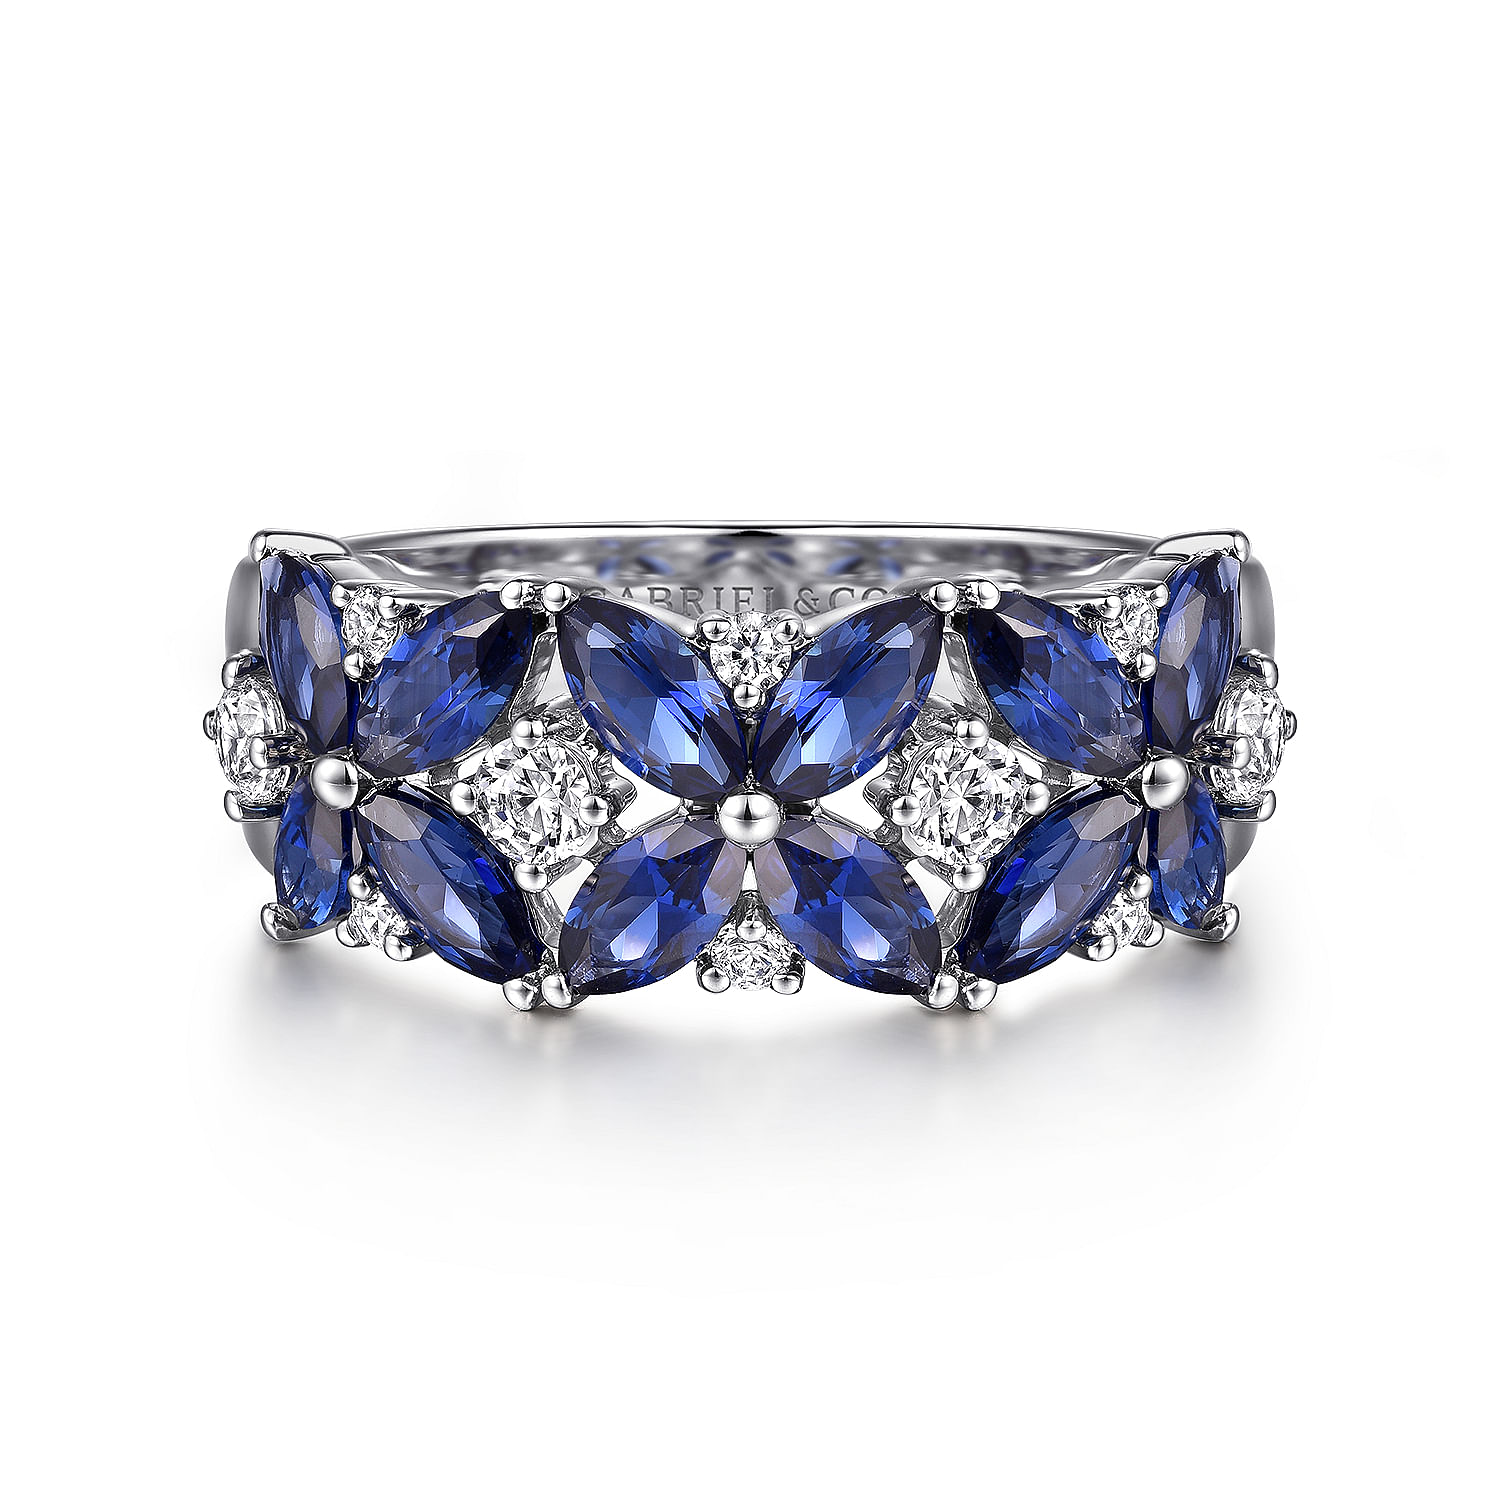 14K White Gold Diamond and Blue Sapphire Floral Ring